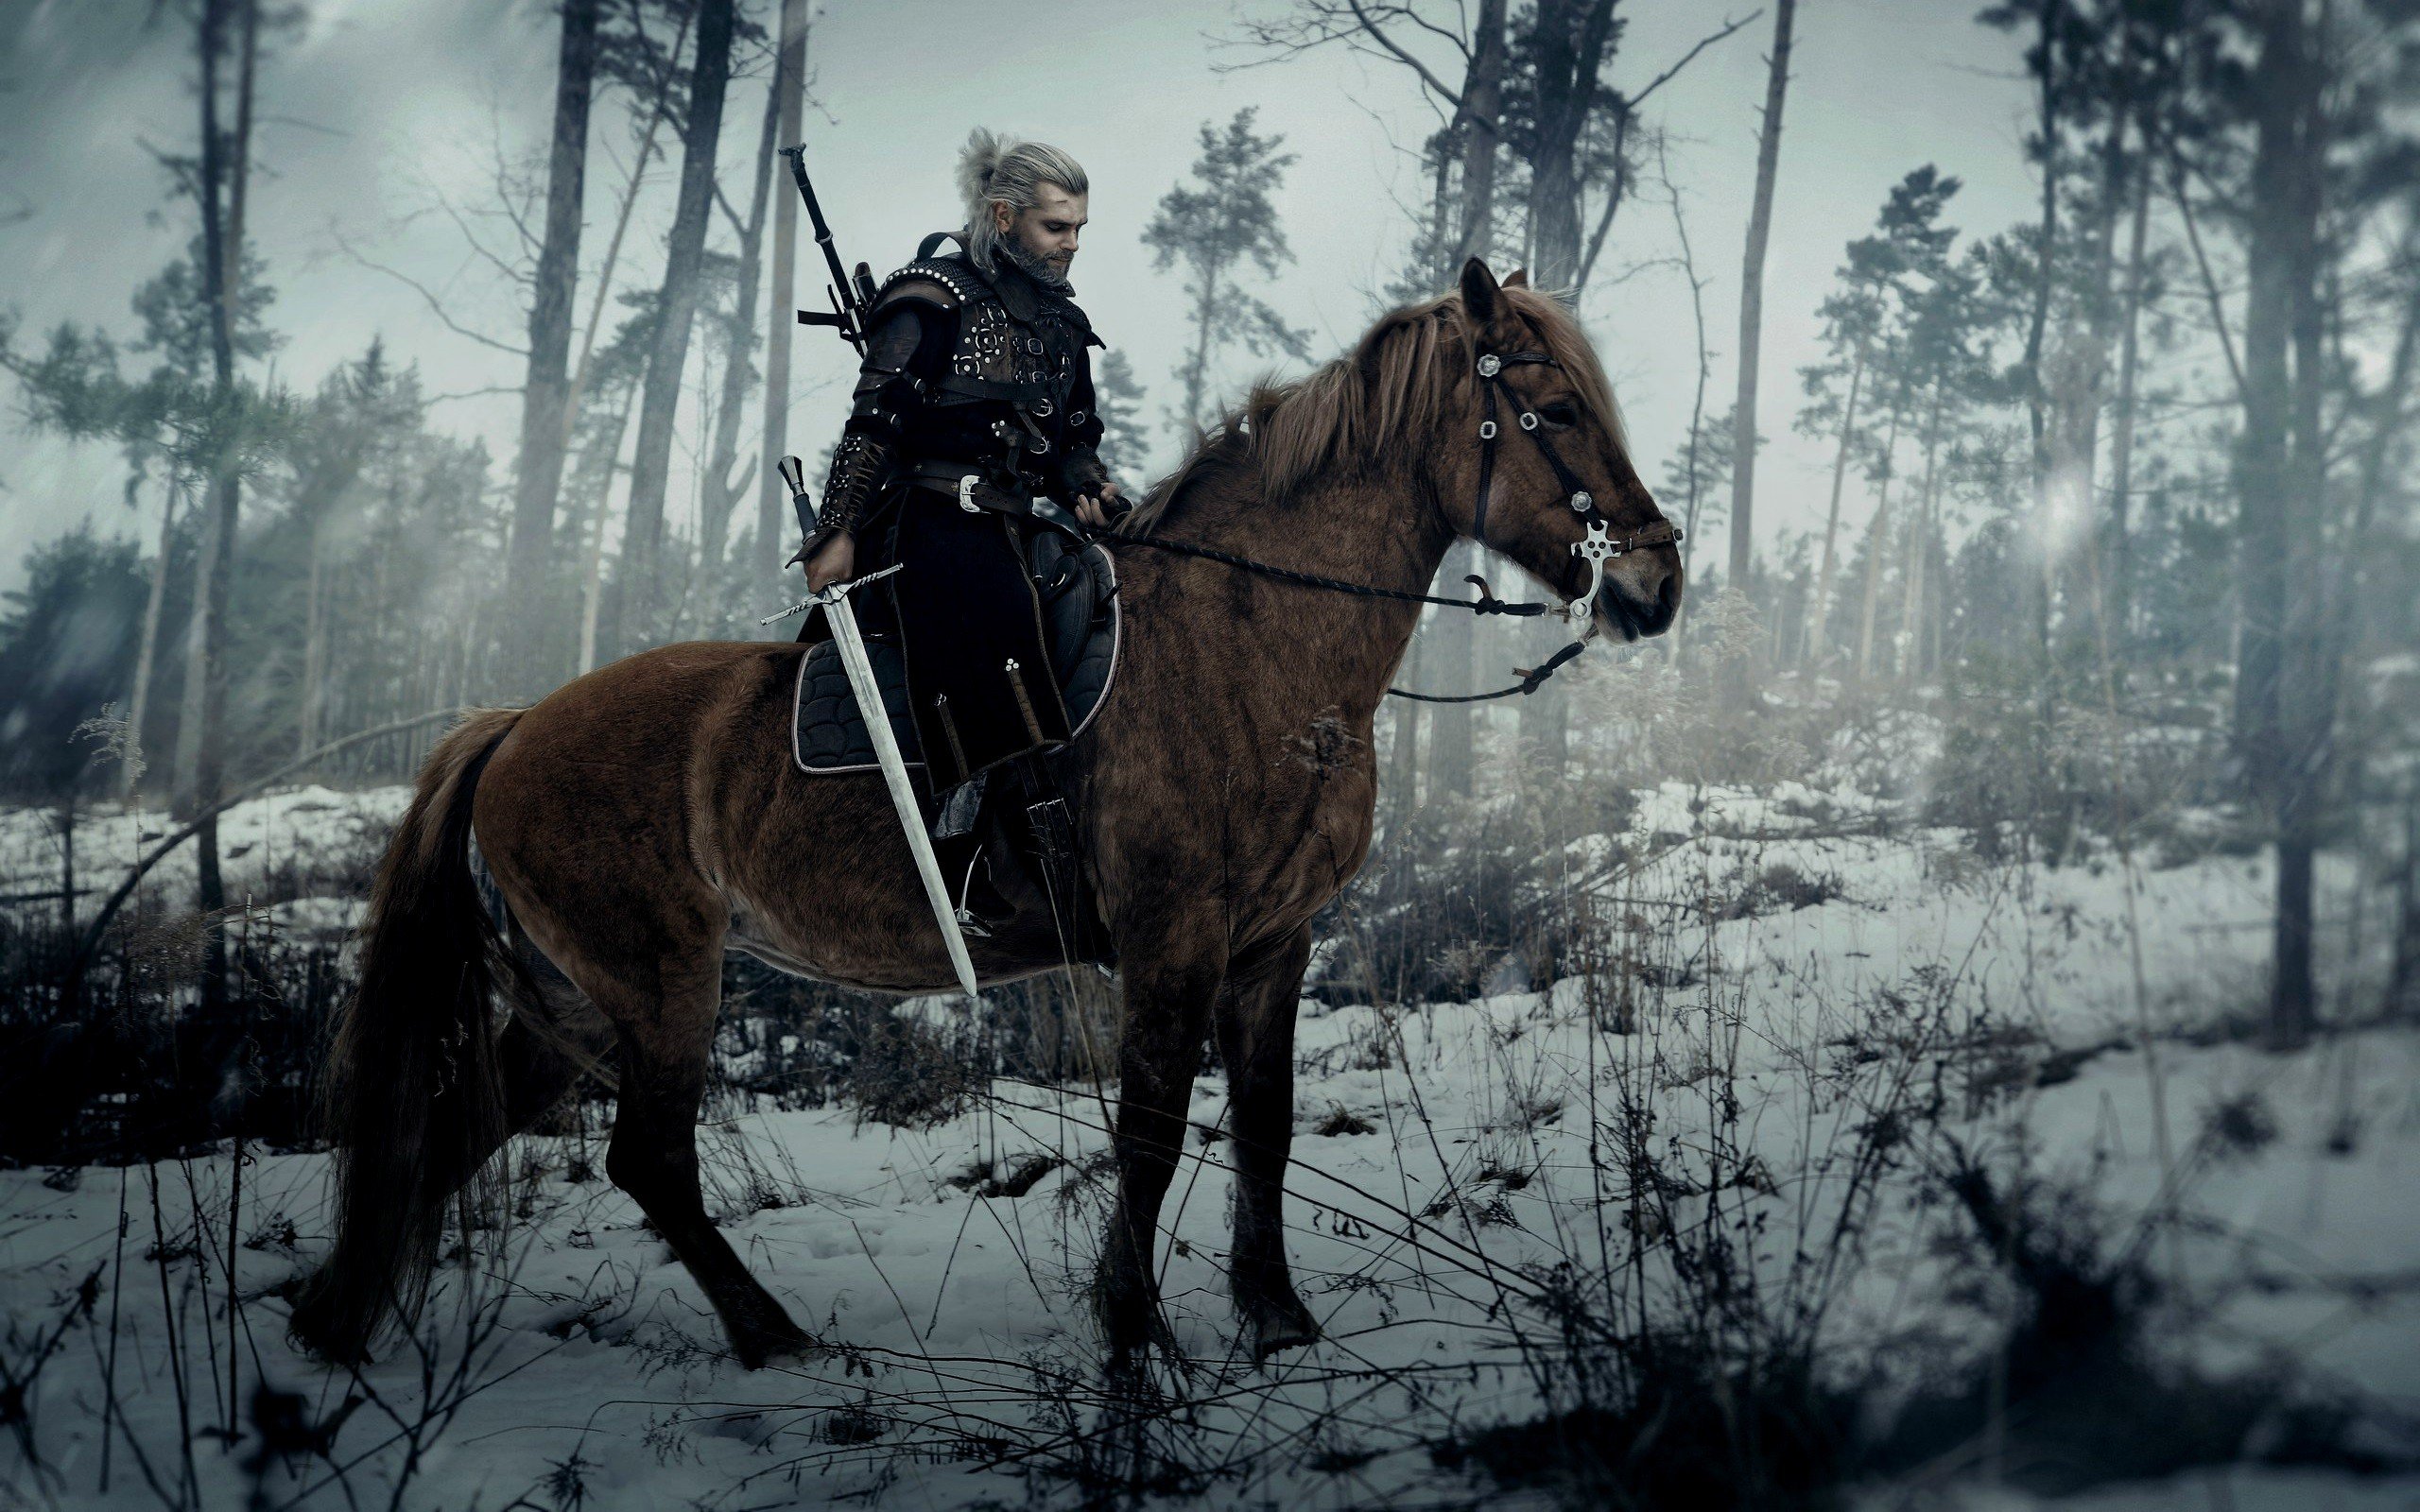 Geralt of Rivia, Cosplay, The Witcher, Sword, Horse, The Witcher 3: Wild Hunt Wallpaper